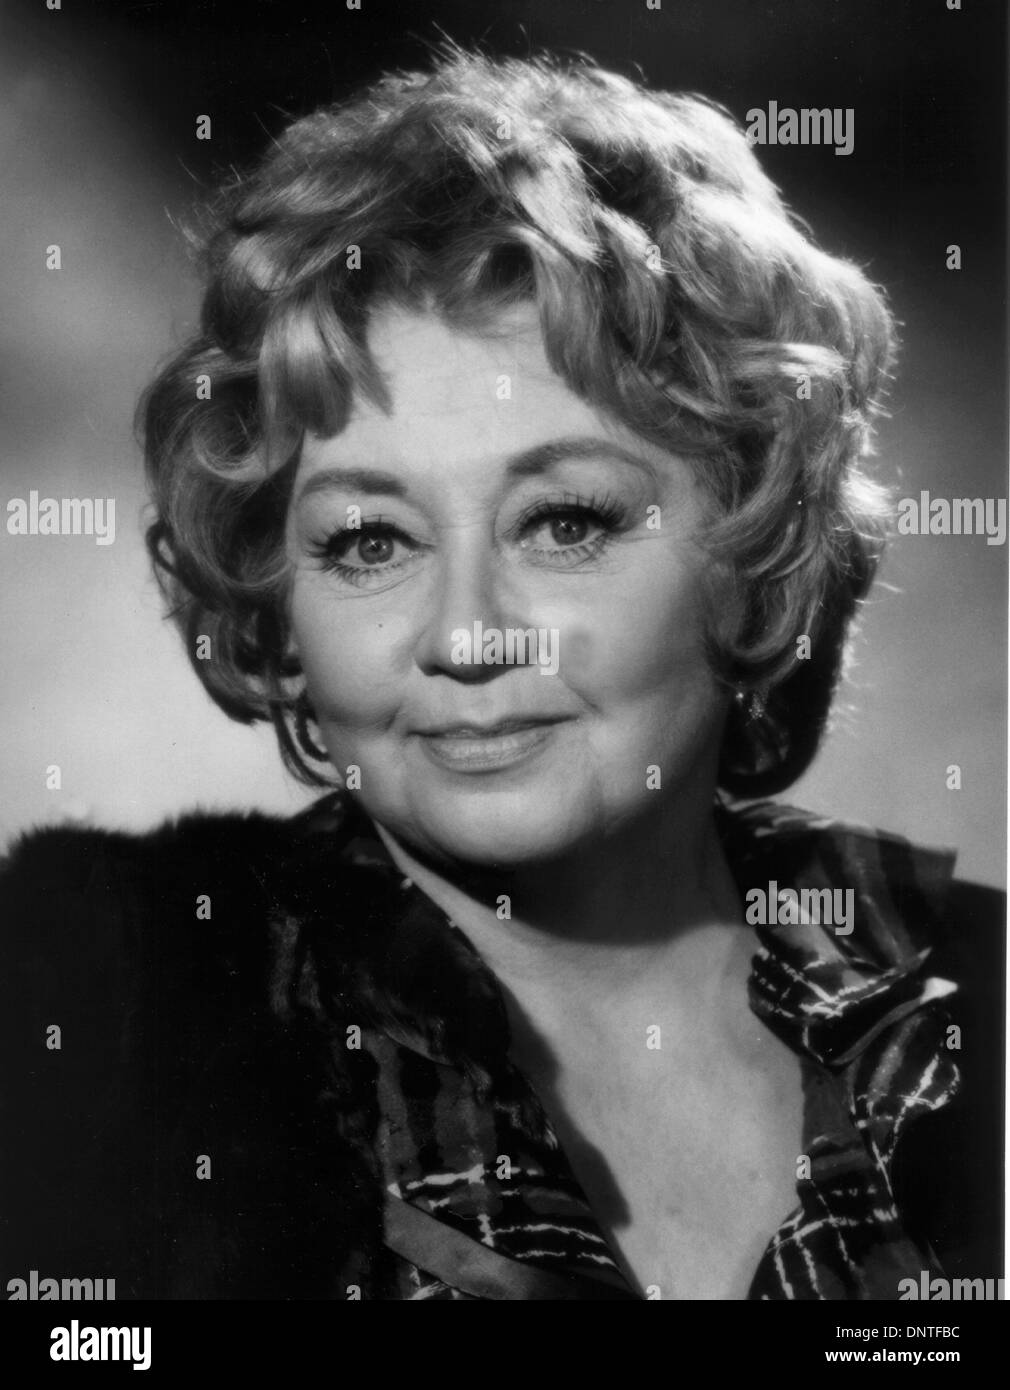 Joan blondell Black and White Stock Photos & Images - Alamy